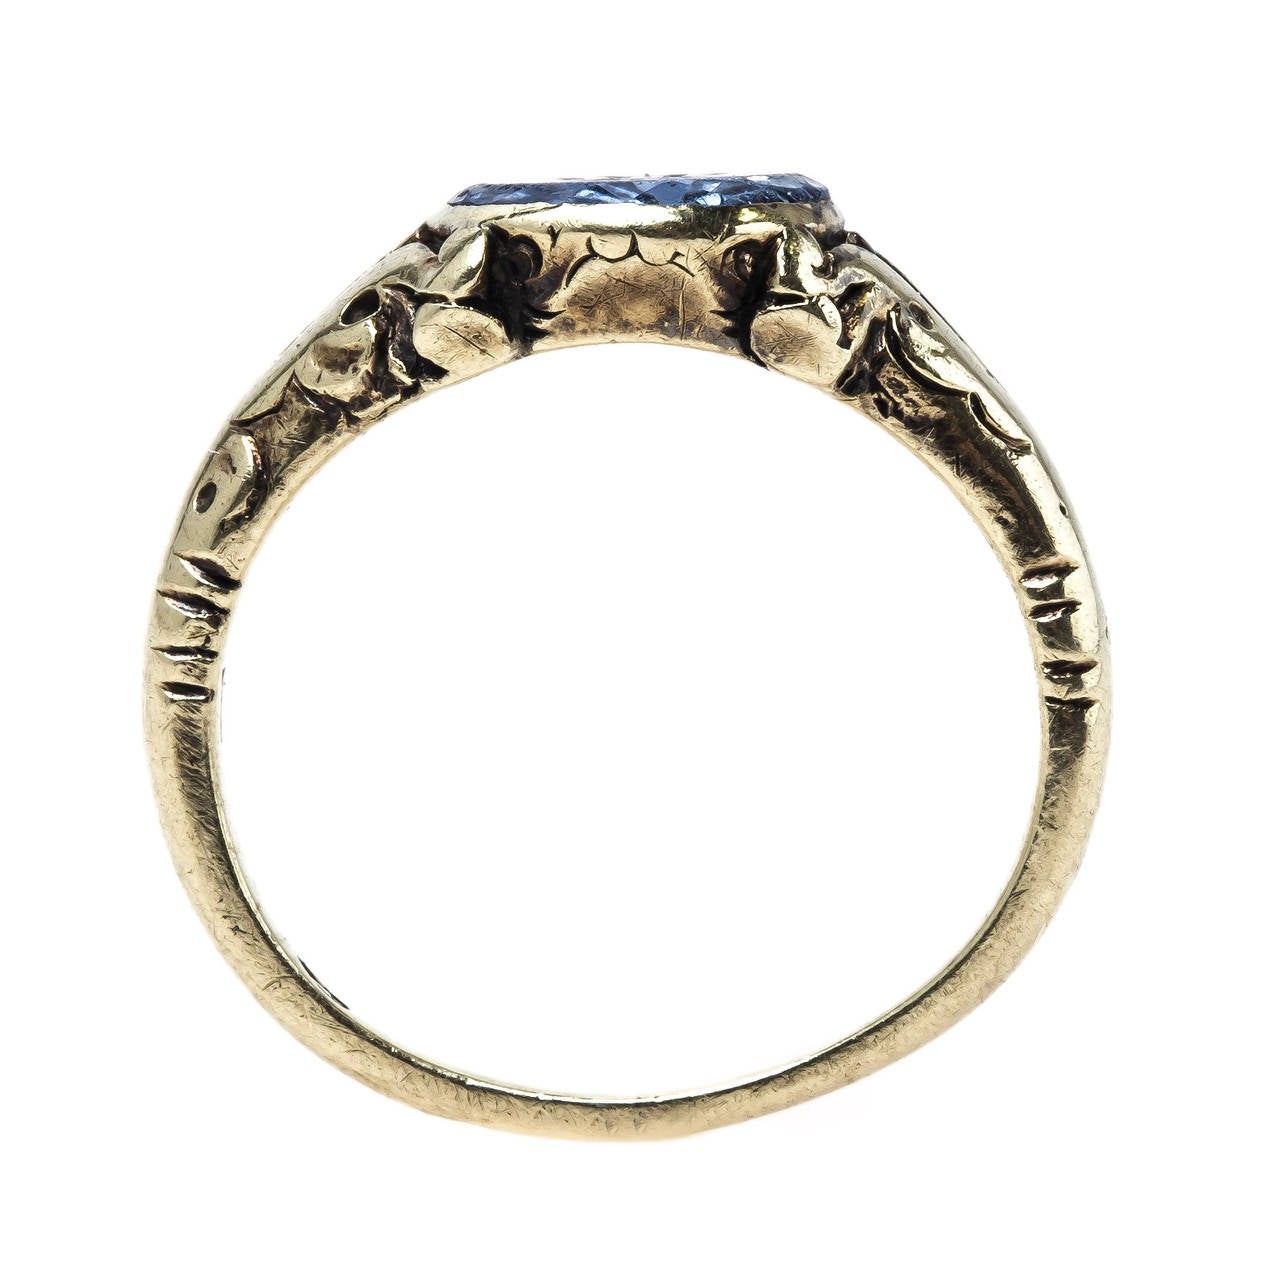 Women's Exceptional Viennese Sapphire Gold Crest Ring